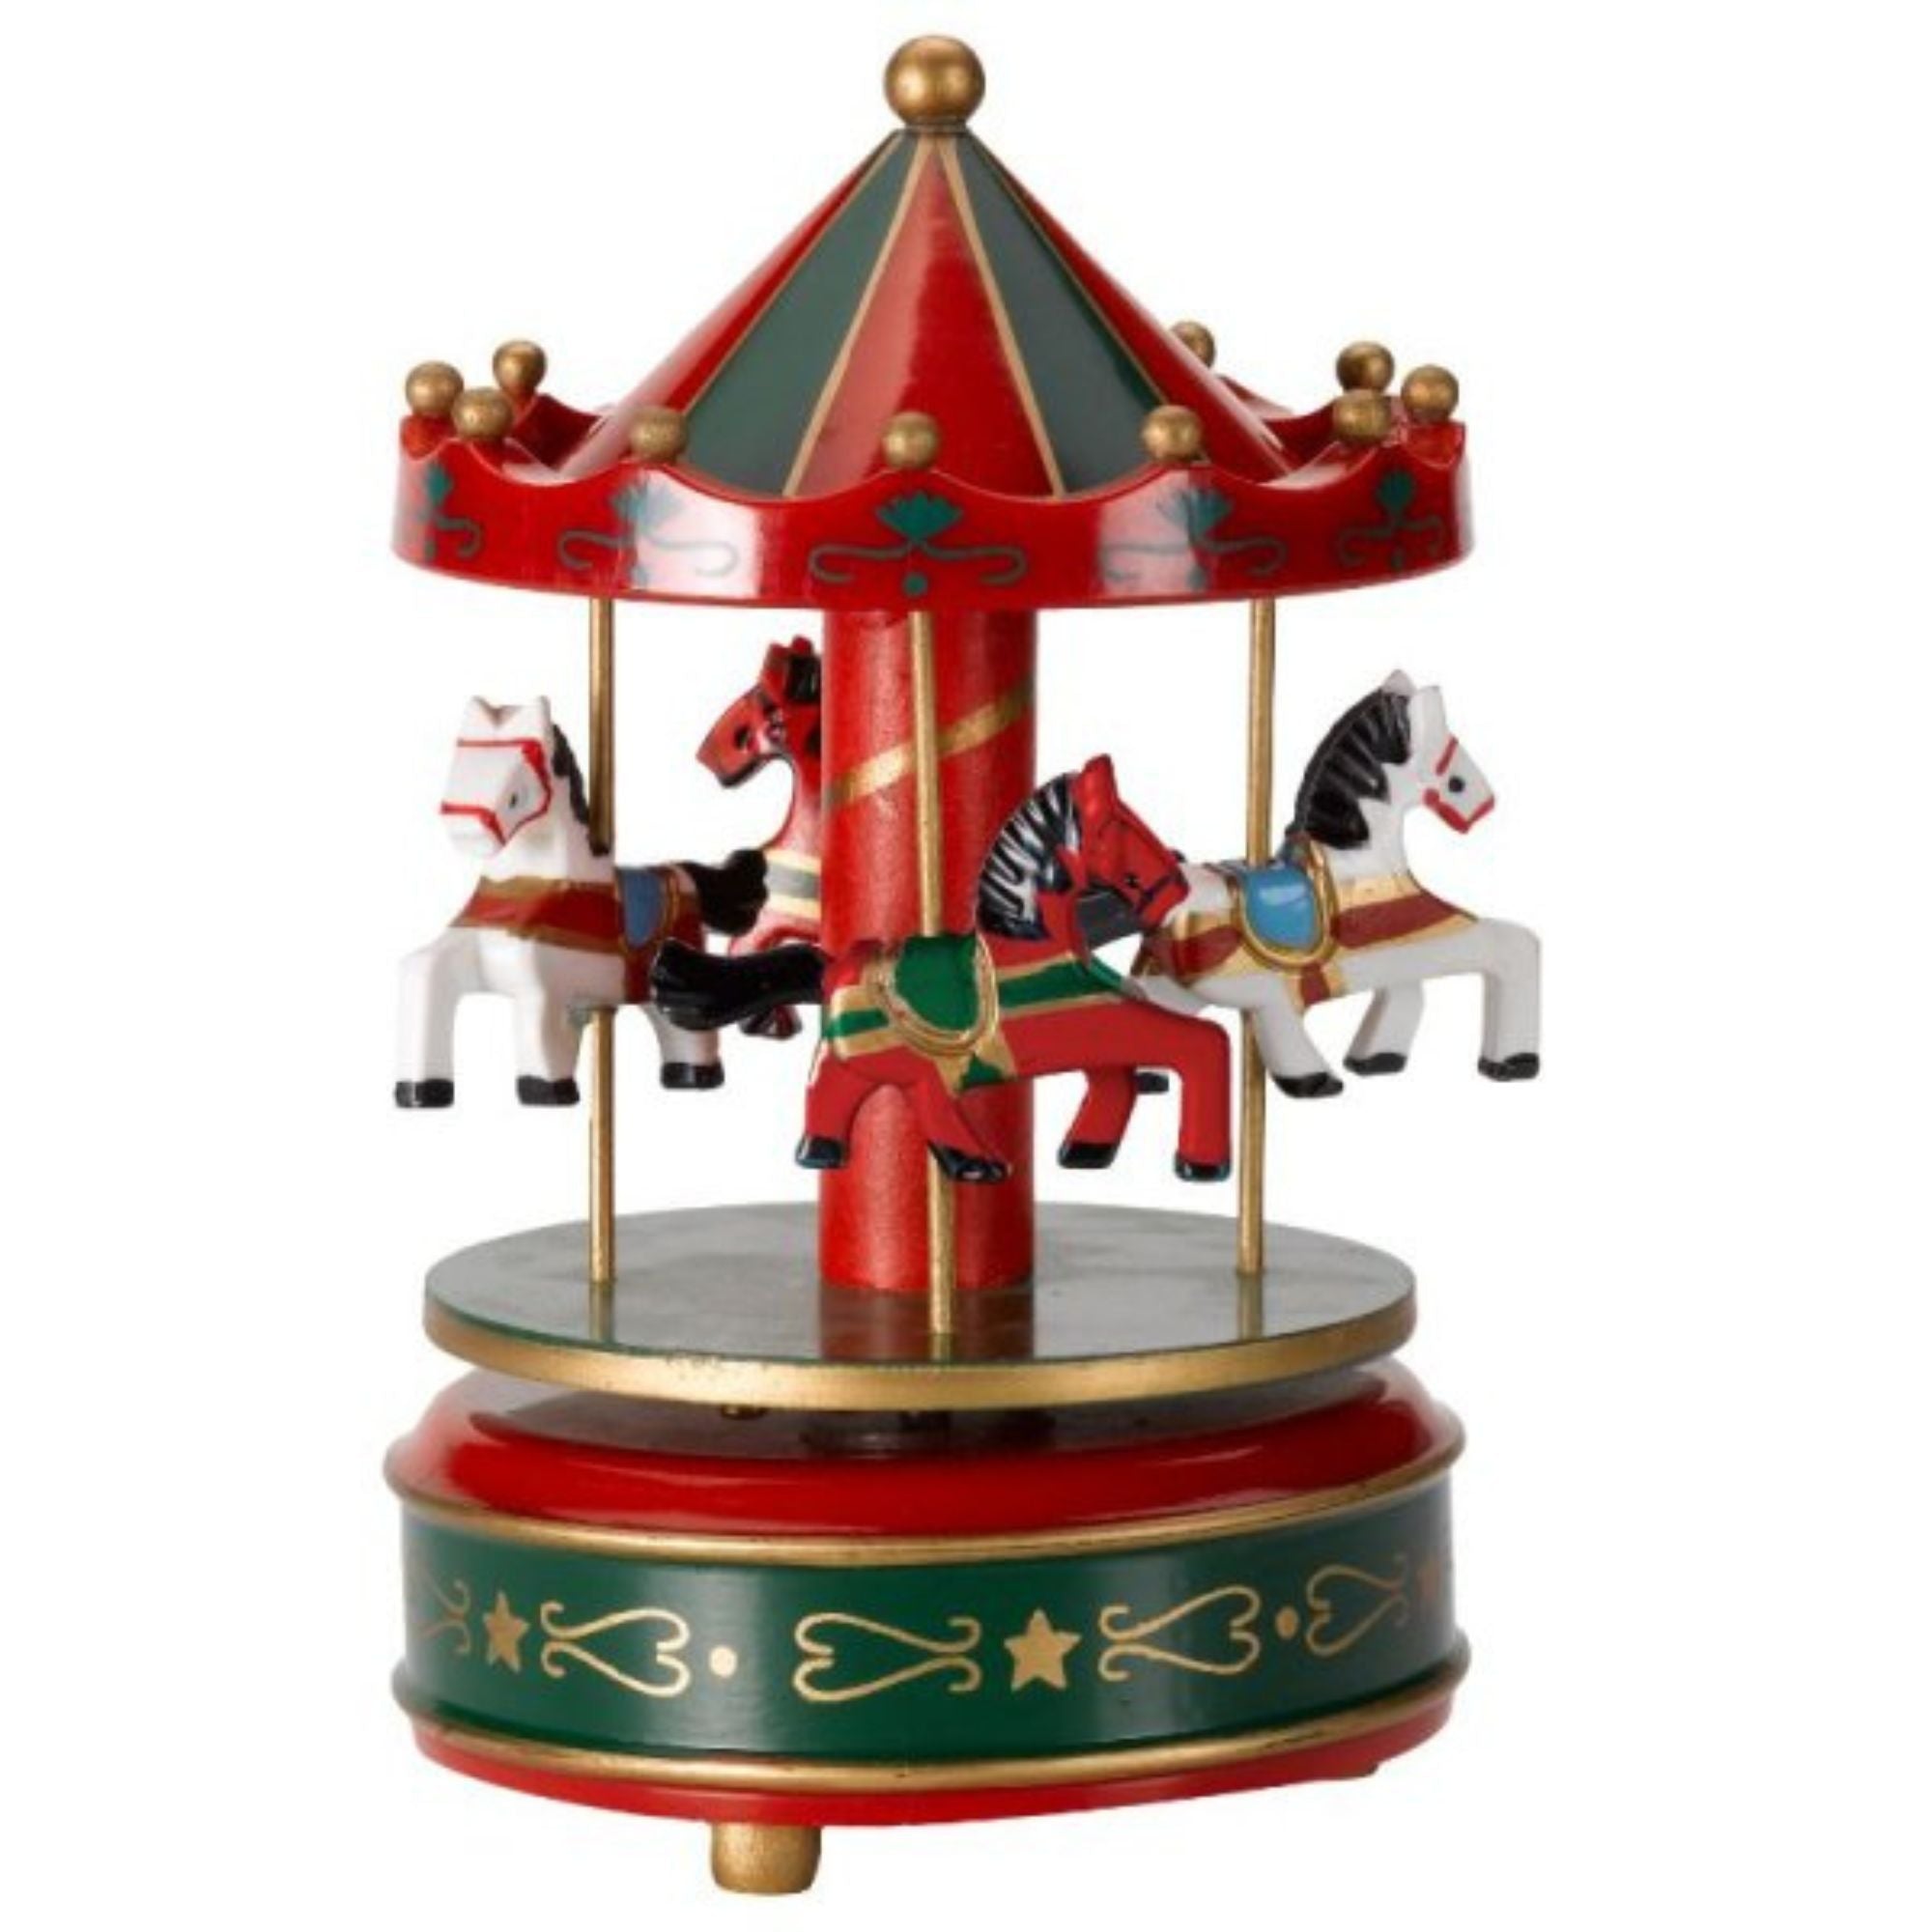 18cm Wind Up Musical Carousel Indoor Christmas Decoration